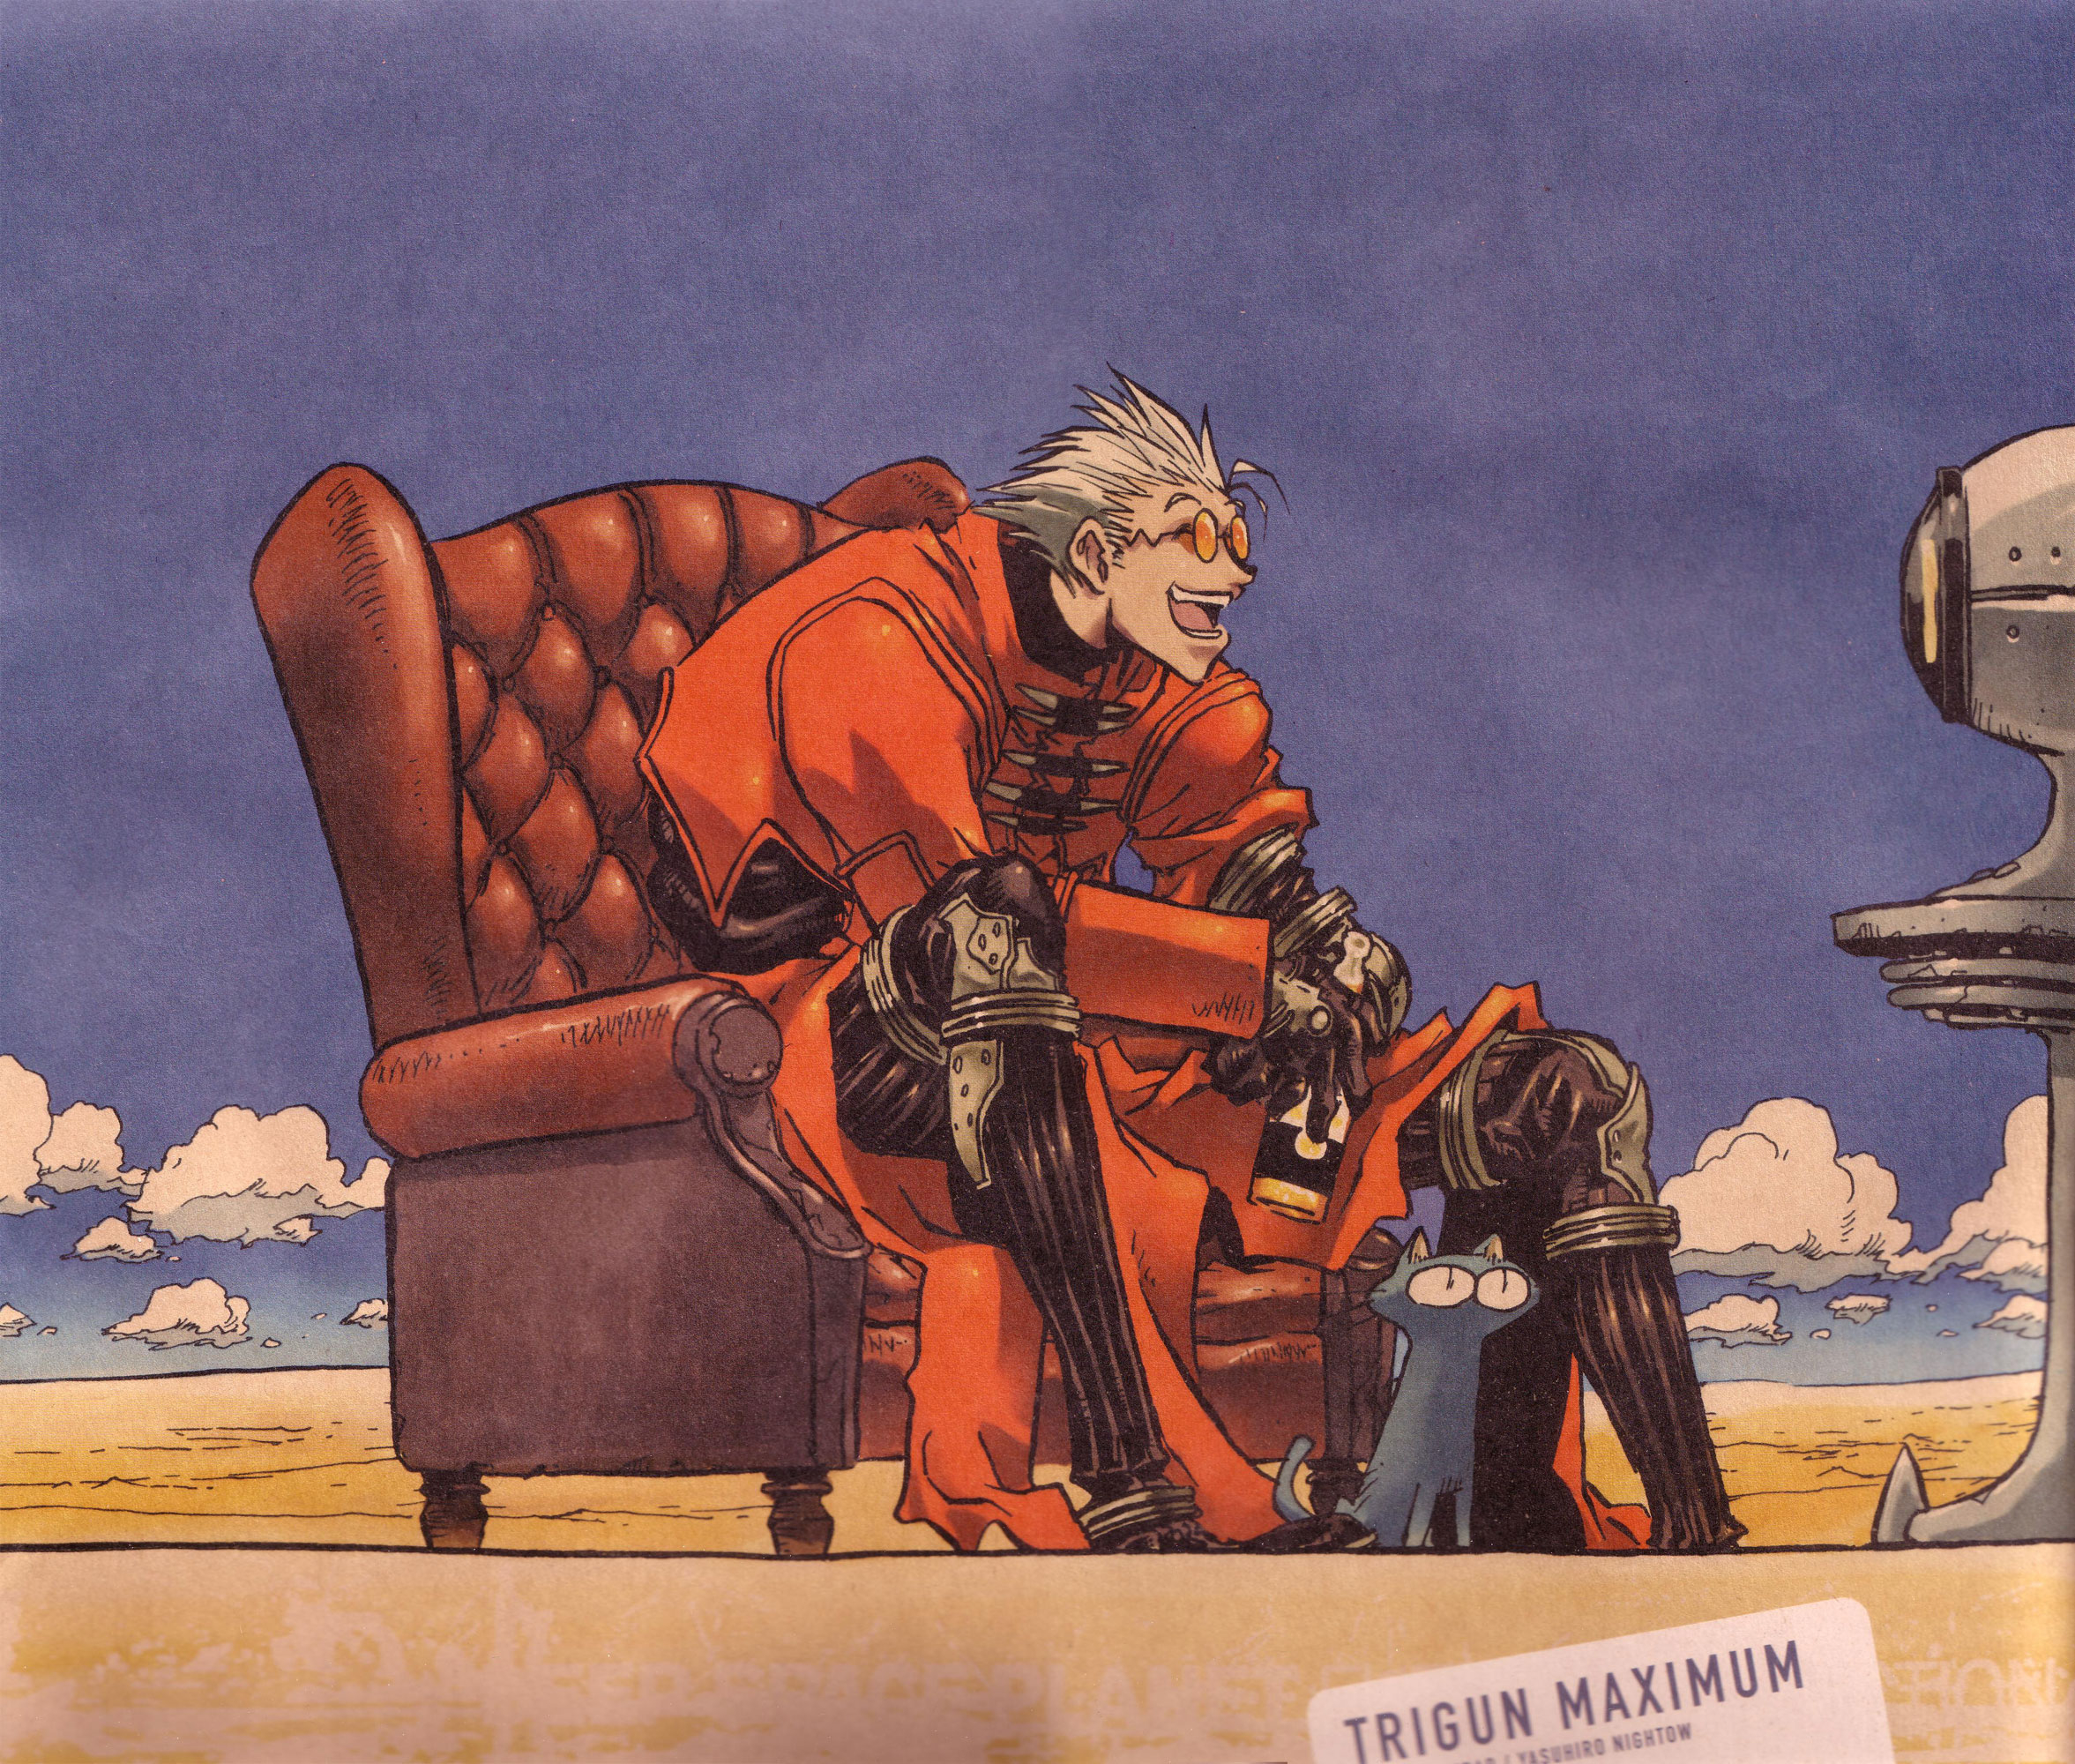 2353x2000 The Collected Paintings Mini Book of Trigun Maximum Wallpaper and Scan Gallery Minitoky